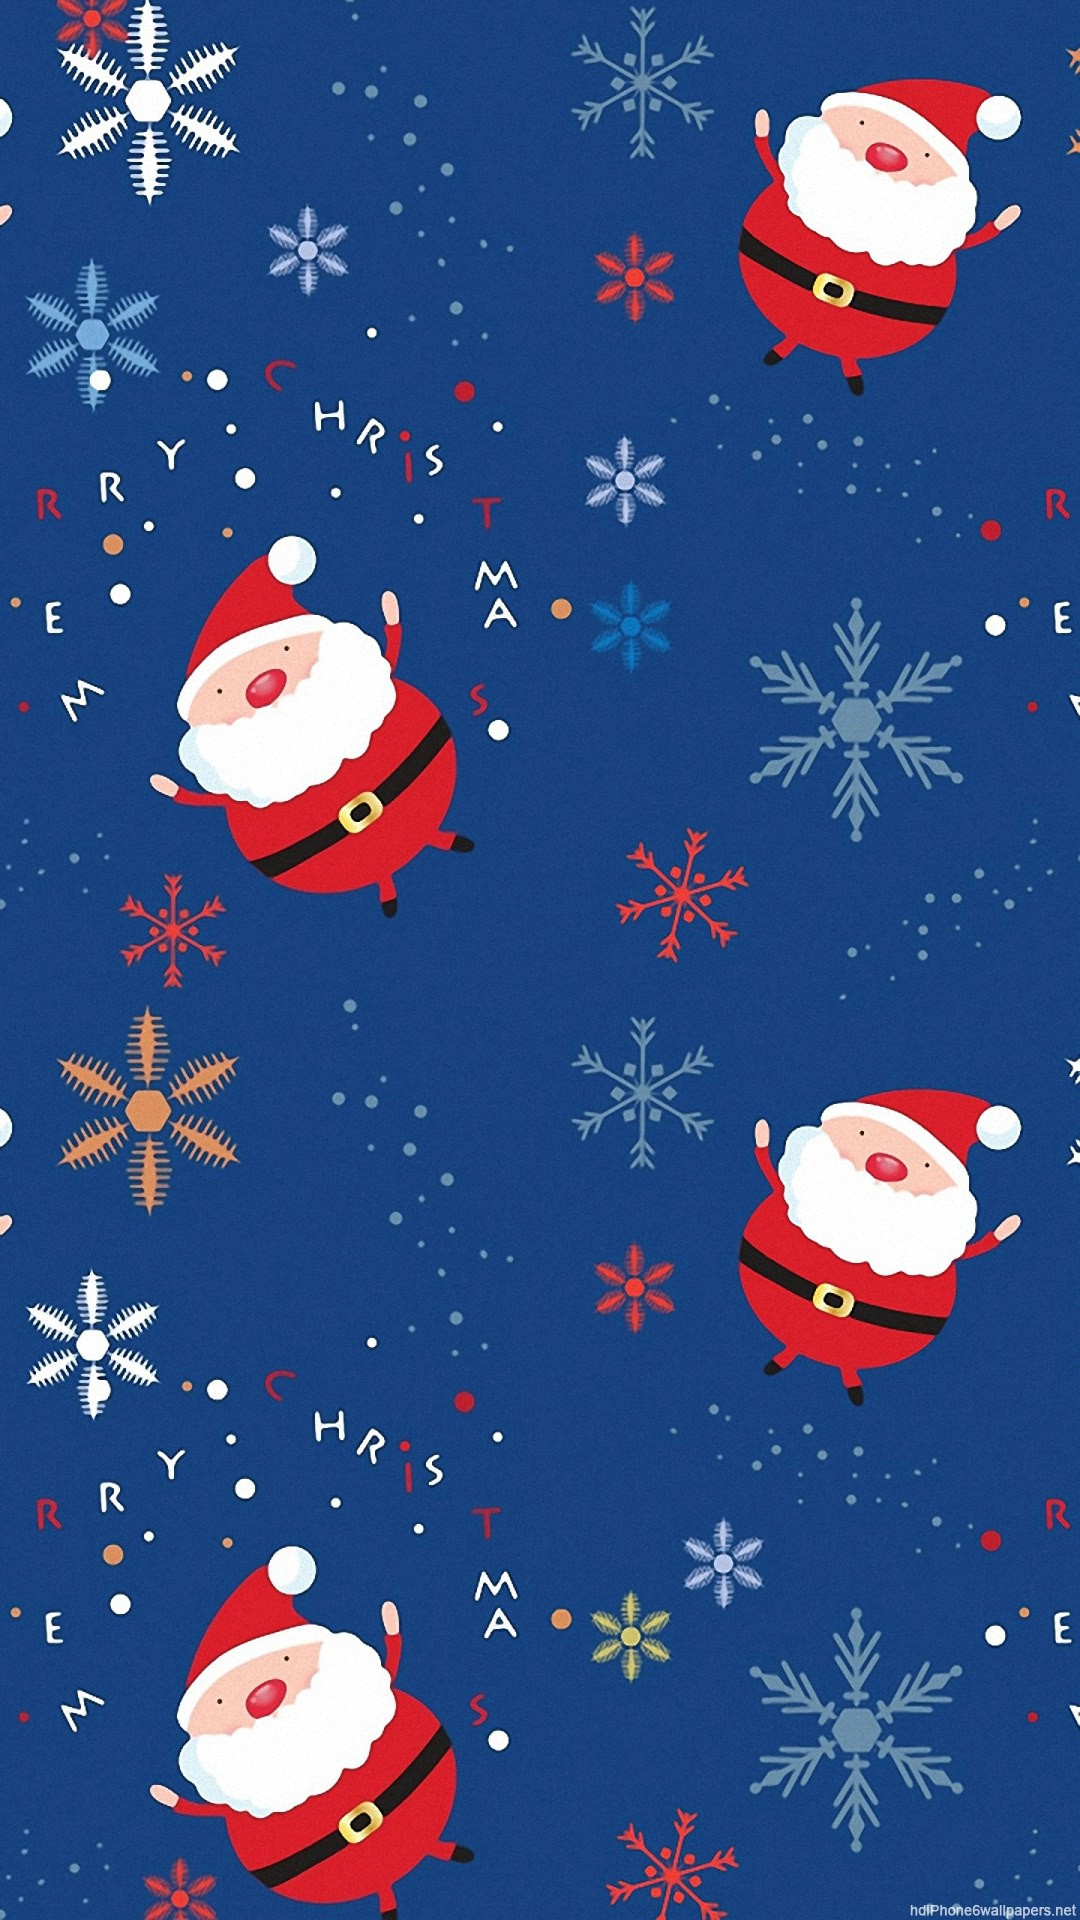 1080x1920 1242x2208 Christmas Wallpaper for Phones (84+ images)">